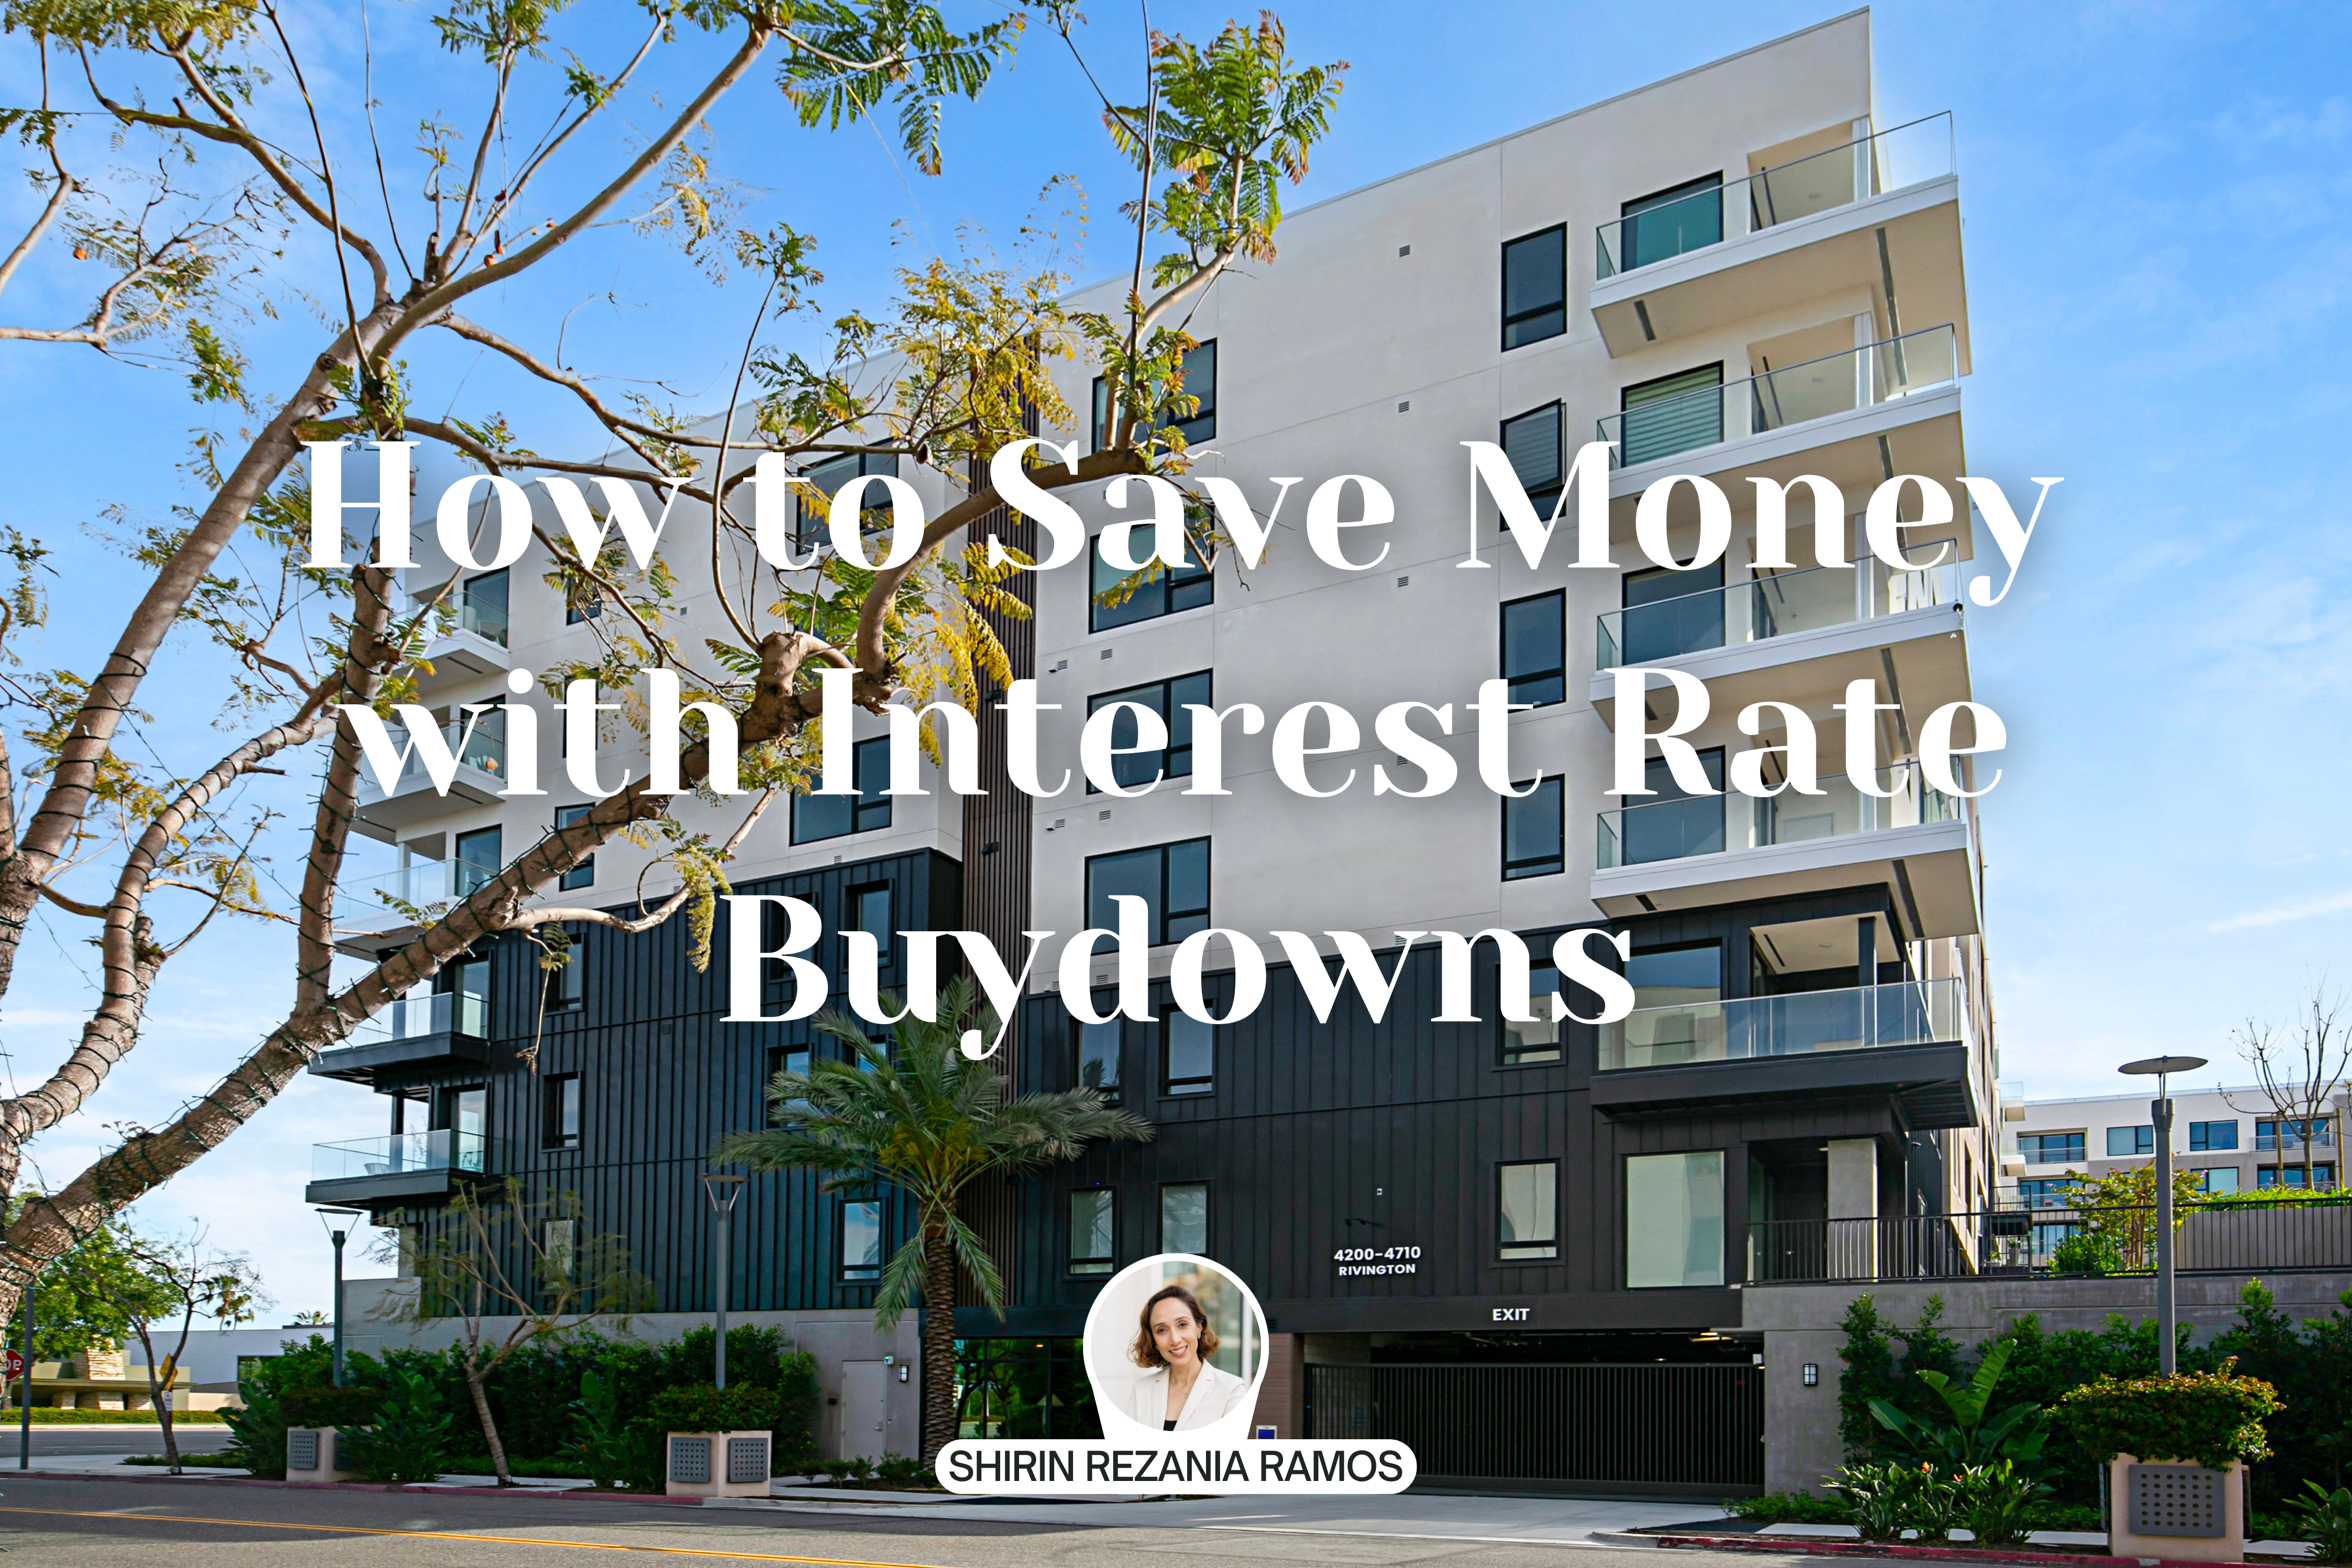 How to Save Money with Interest Rate Buydowns